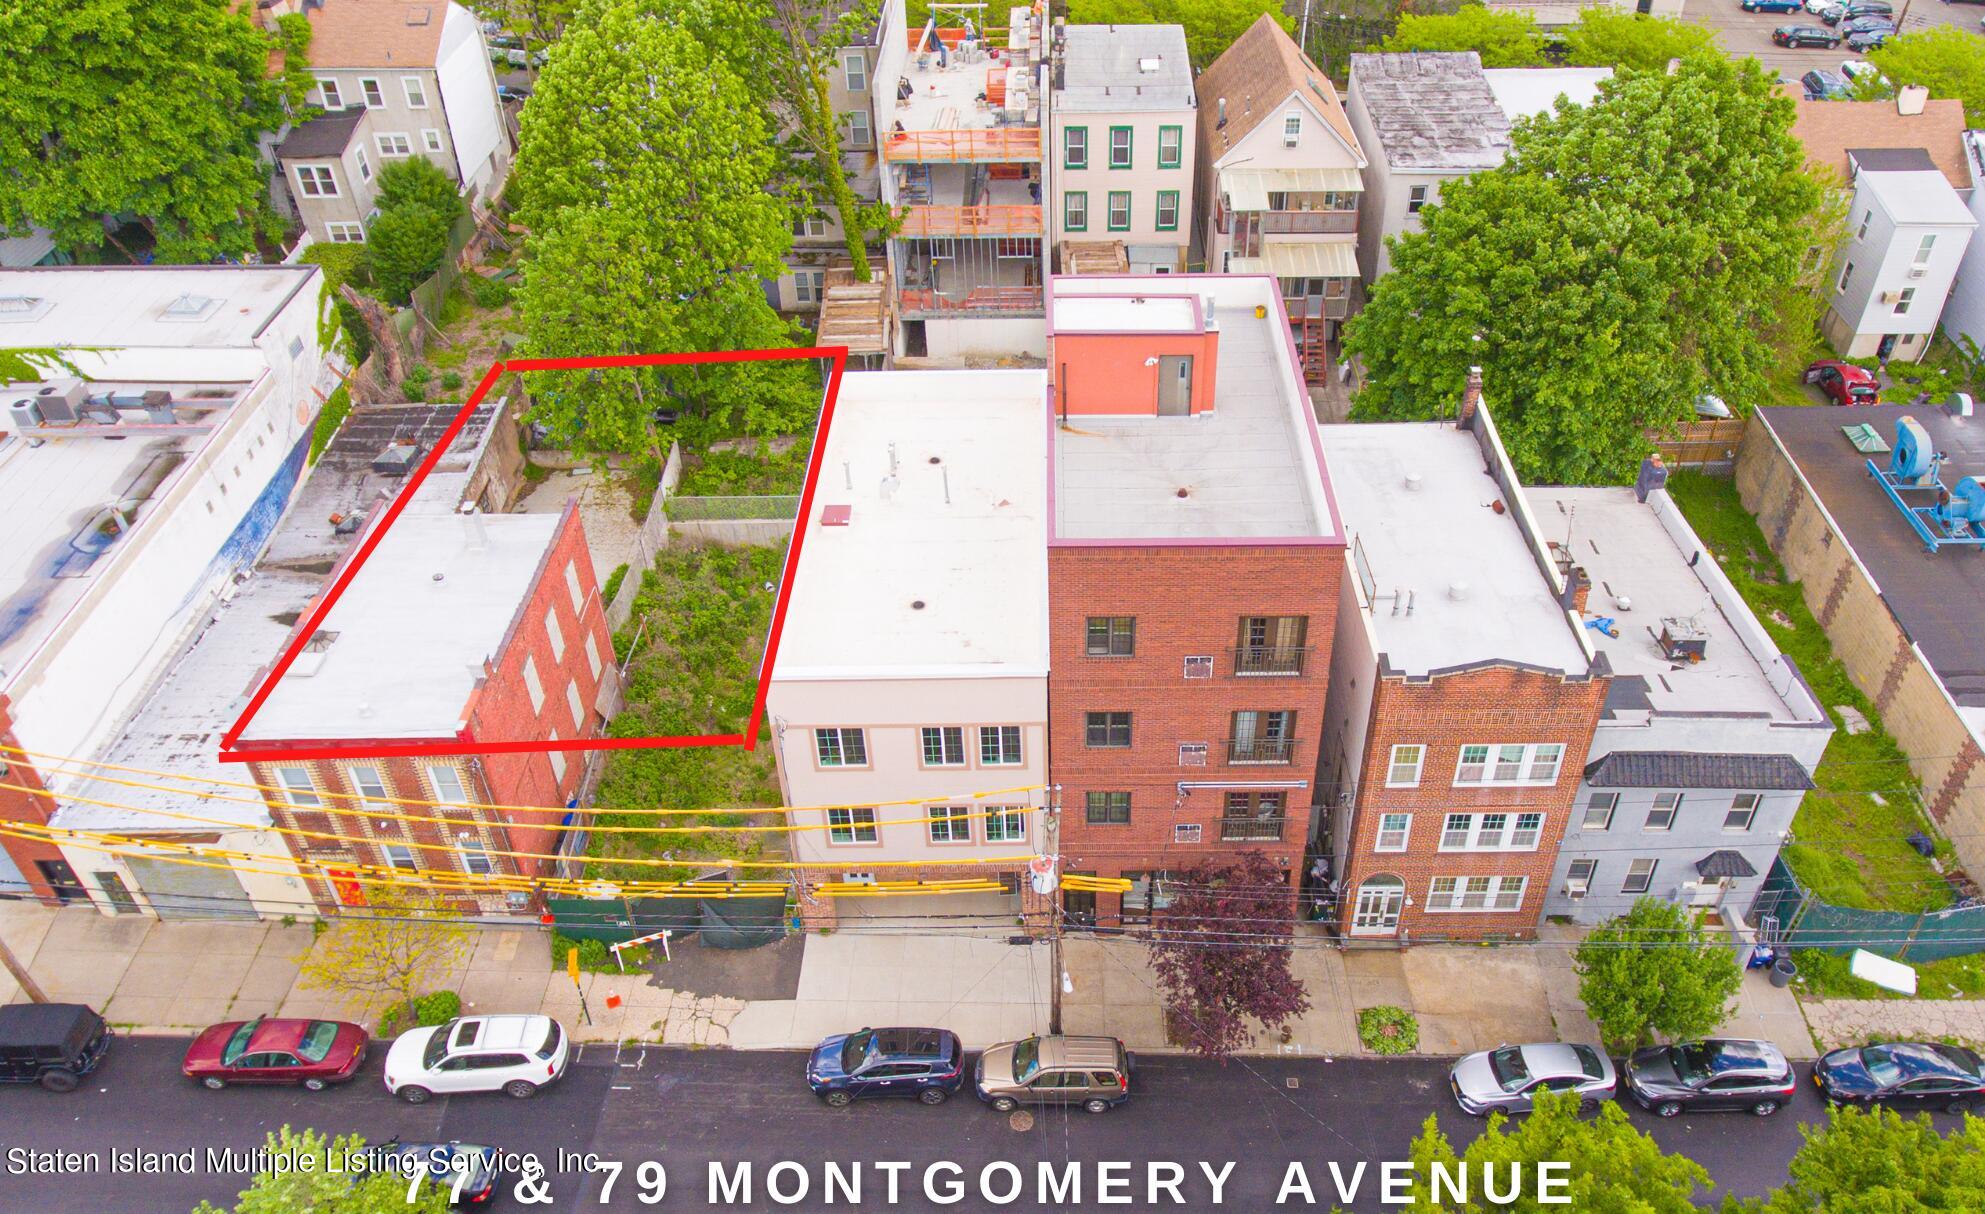 a aerial view of multi story residential apartment building with yard